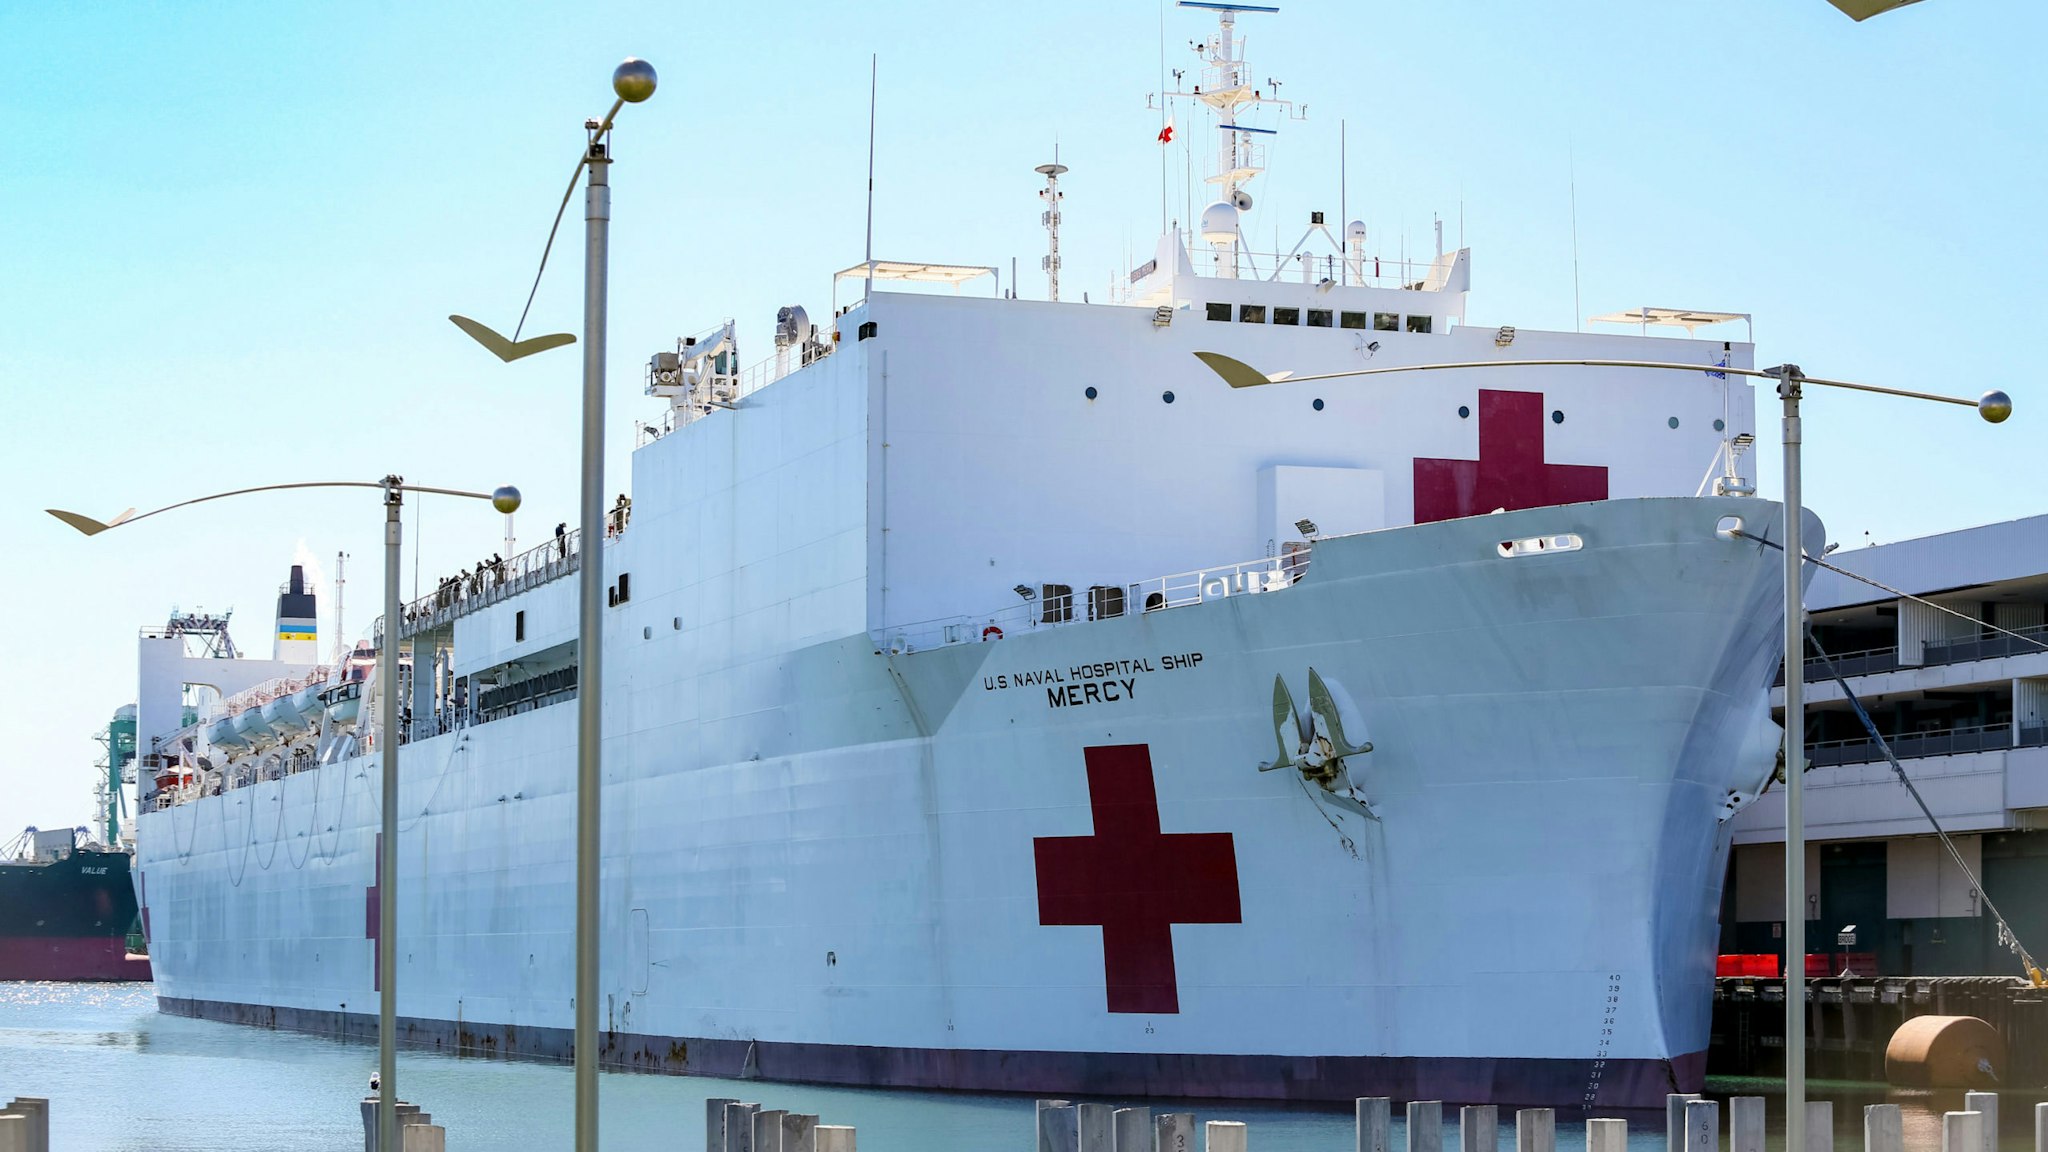 LOS ANGELES, CA - MARCH 27: A view of the USNS Mercy Hospital Ship at the Port of Los Angeles as it arrives to assist with a growing number of COVID-19 patients on March 27, 2020 in Los Angeles, California. The Coronavirus (COVID-19) pandemic has spread to many countries across the world, claiming over 20,000 lives and infecting hundreds of thousands more.